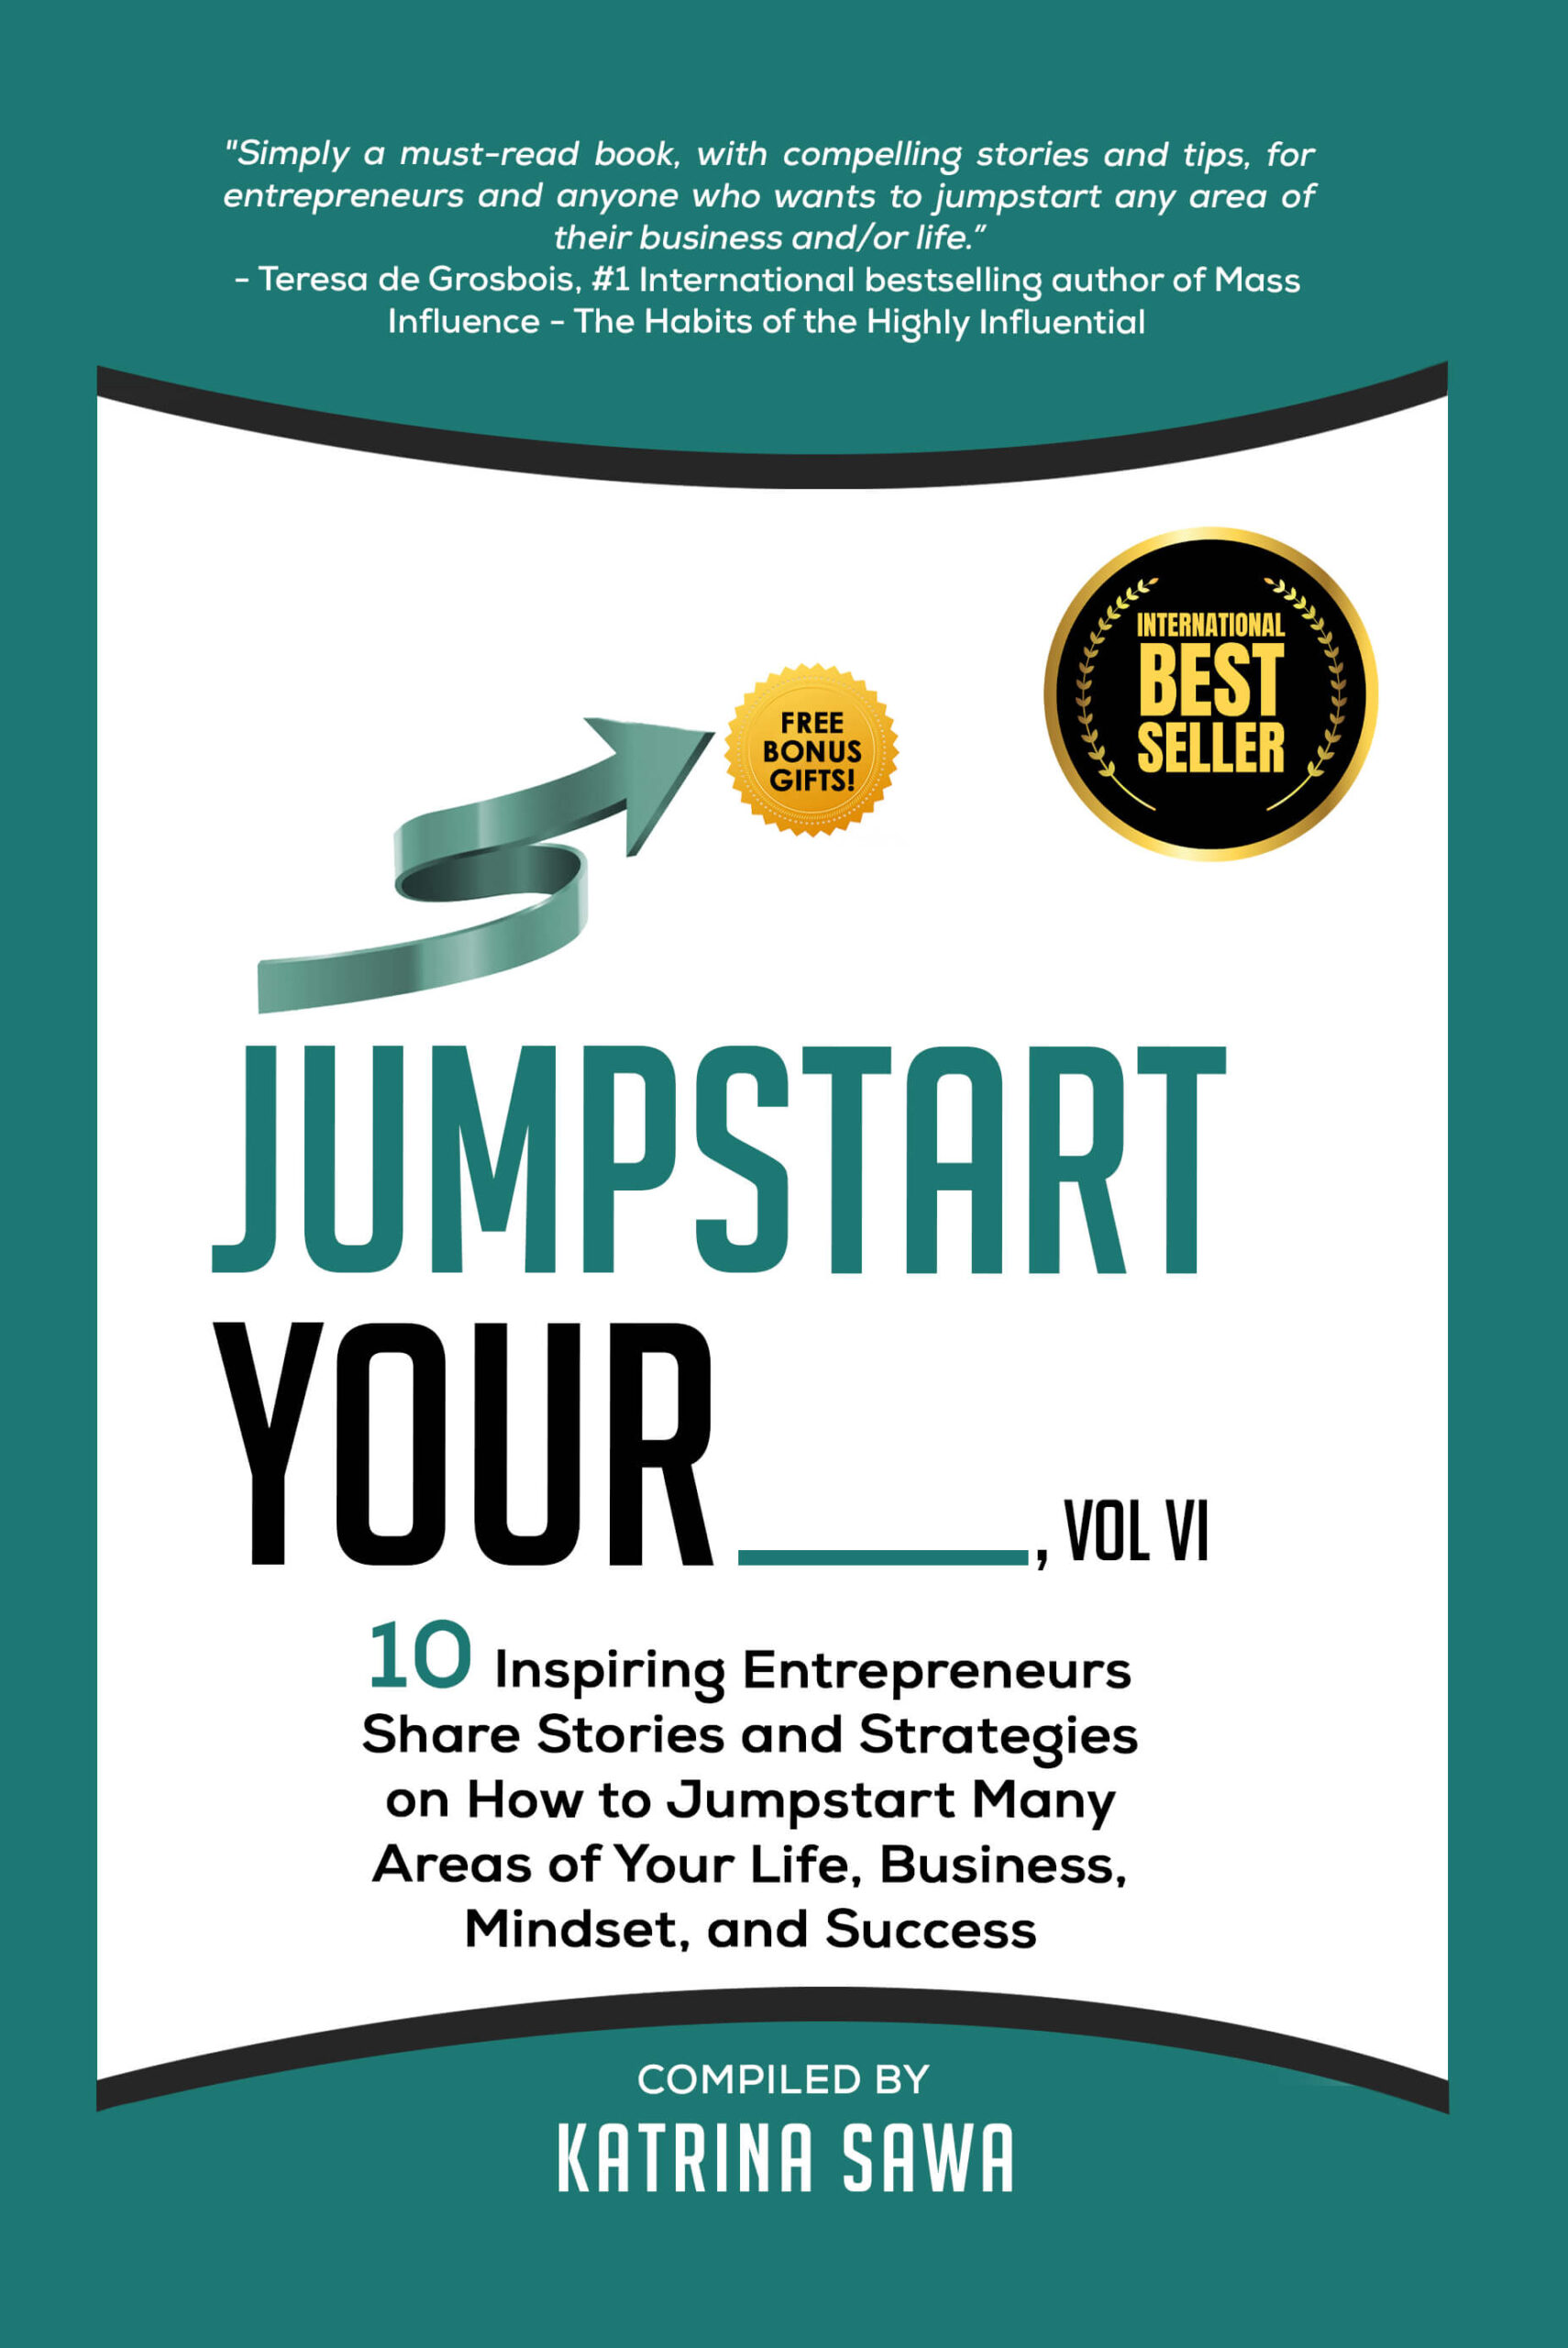 Jumpstart Your _____, Vol. VI cover